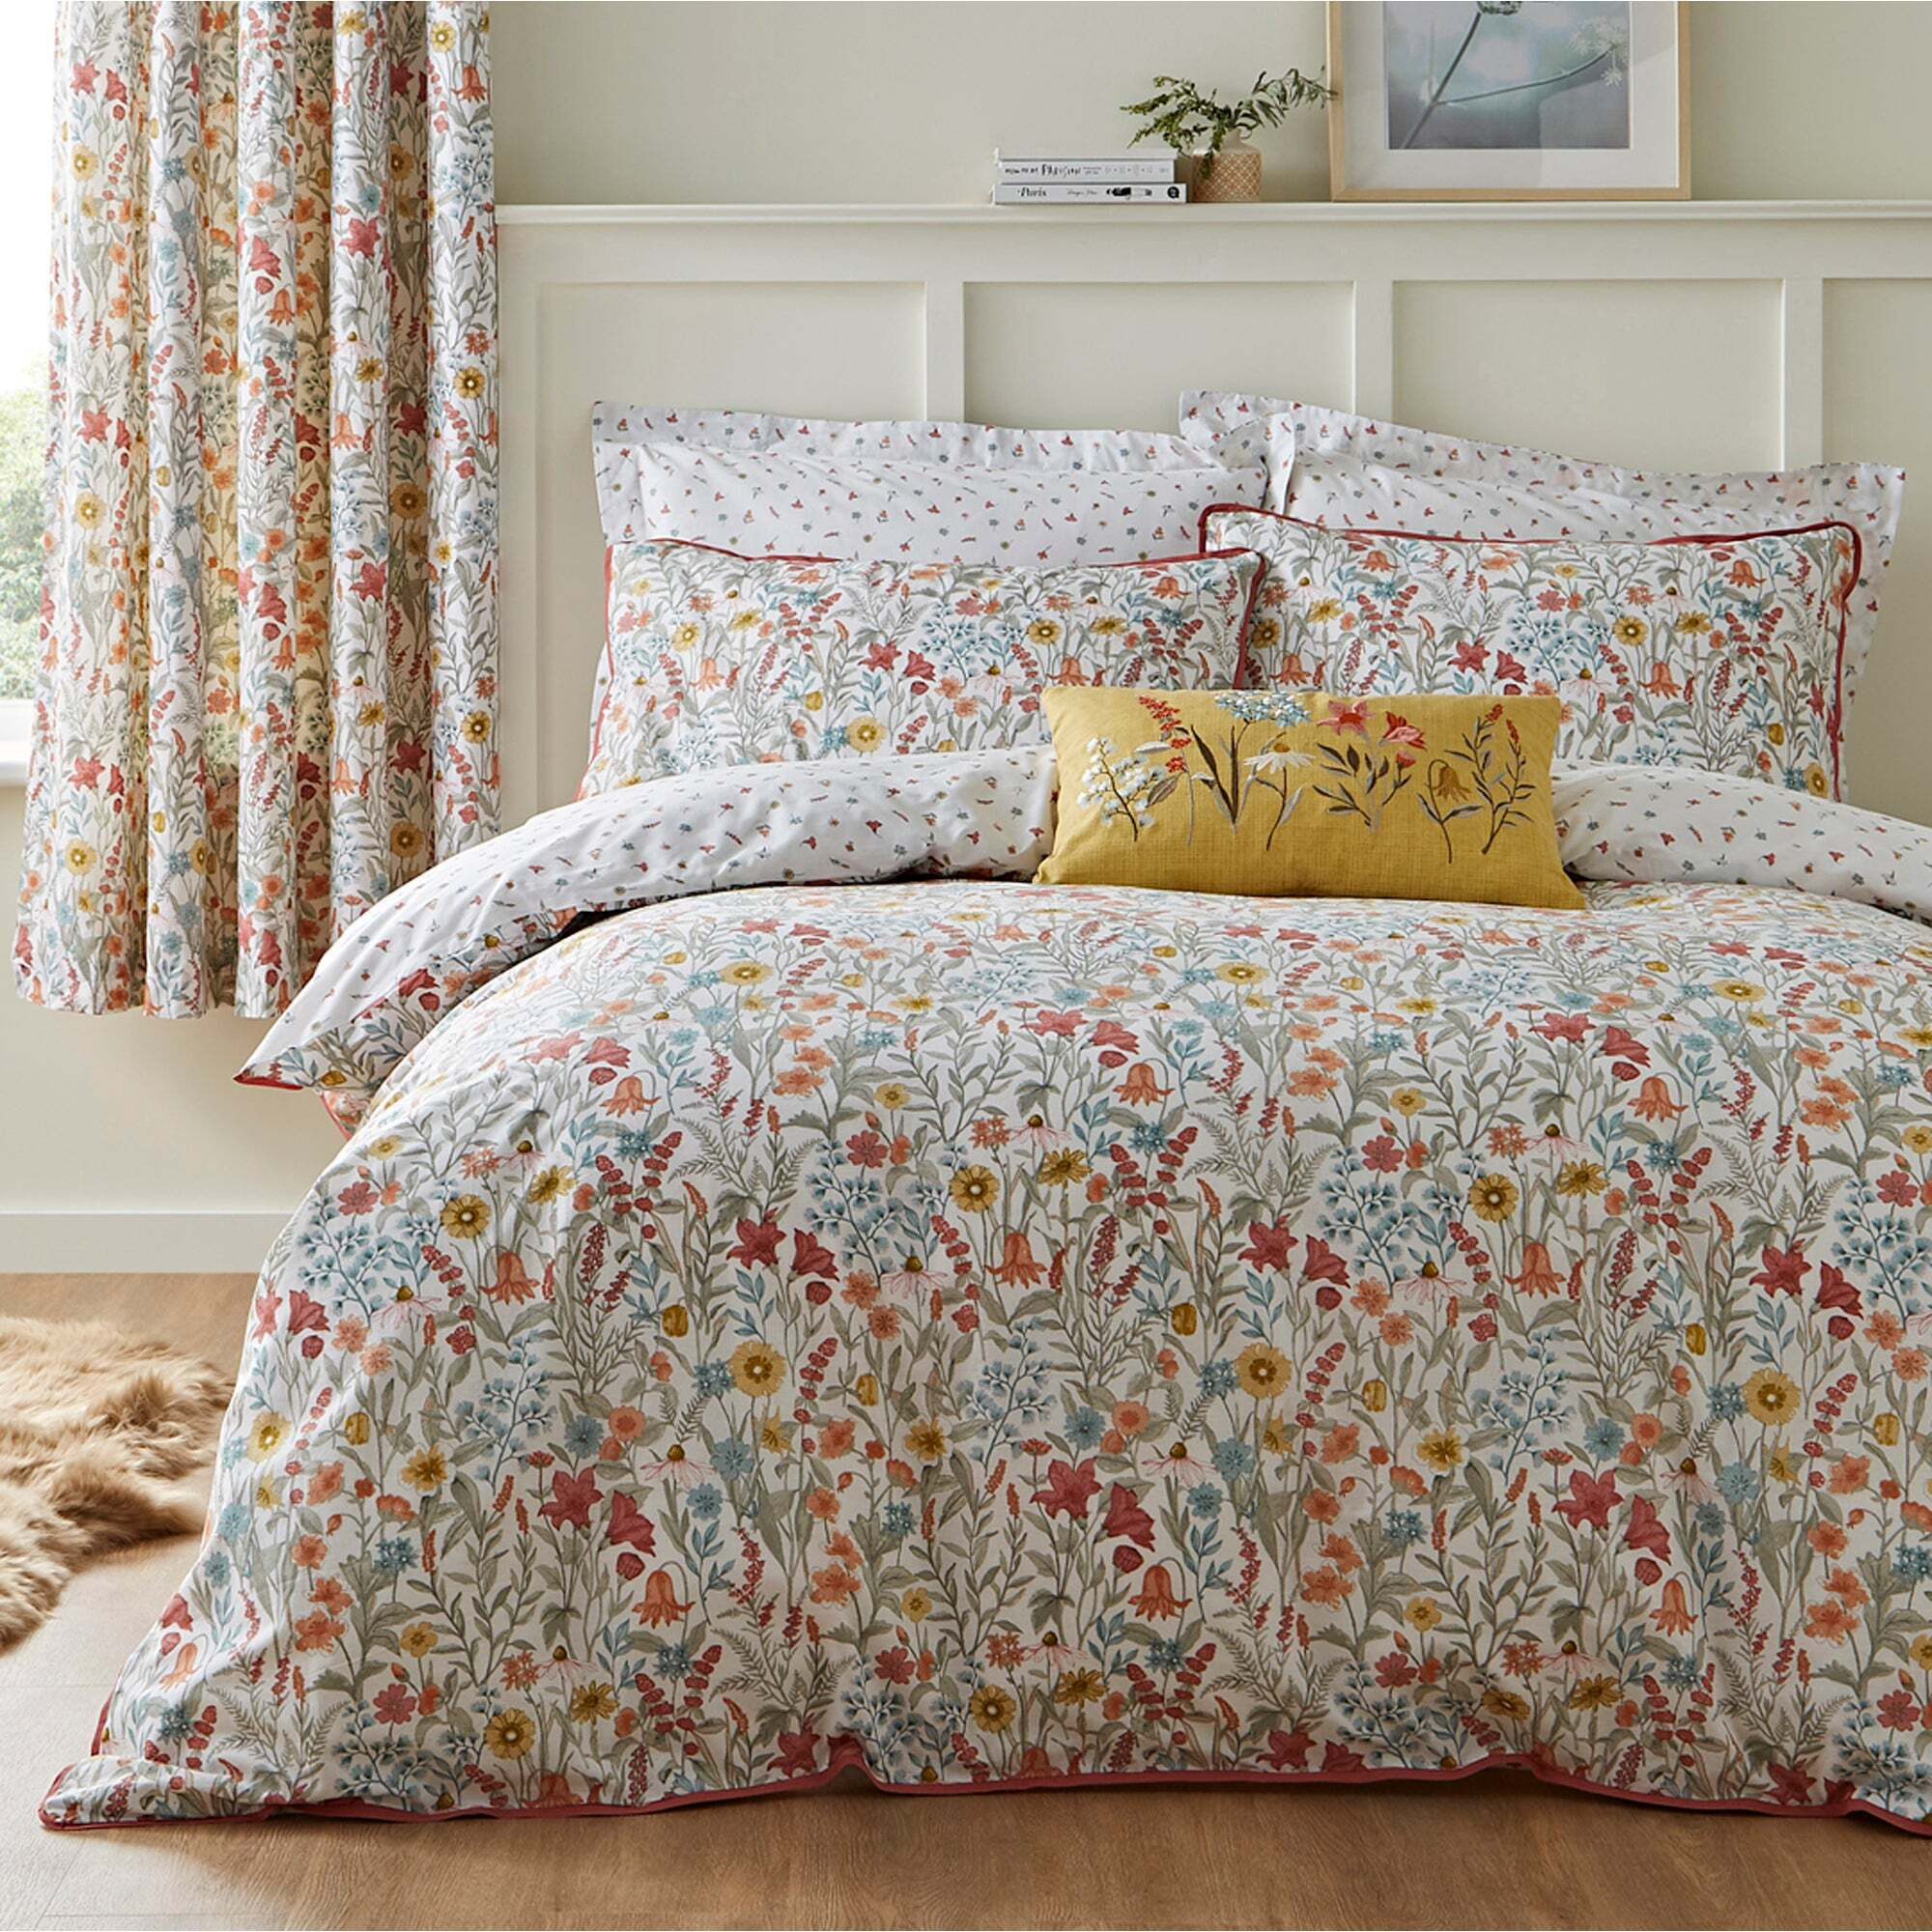 Meadow Ditsy Floral Red 100% Cotton Reversible Duvet Cover and Pillowcase Set Red and White